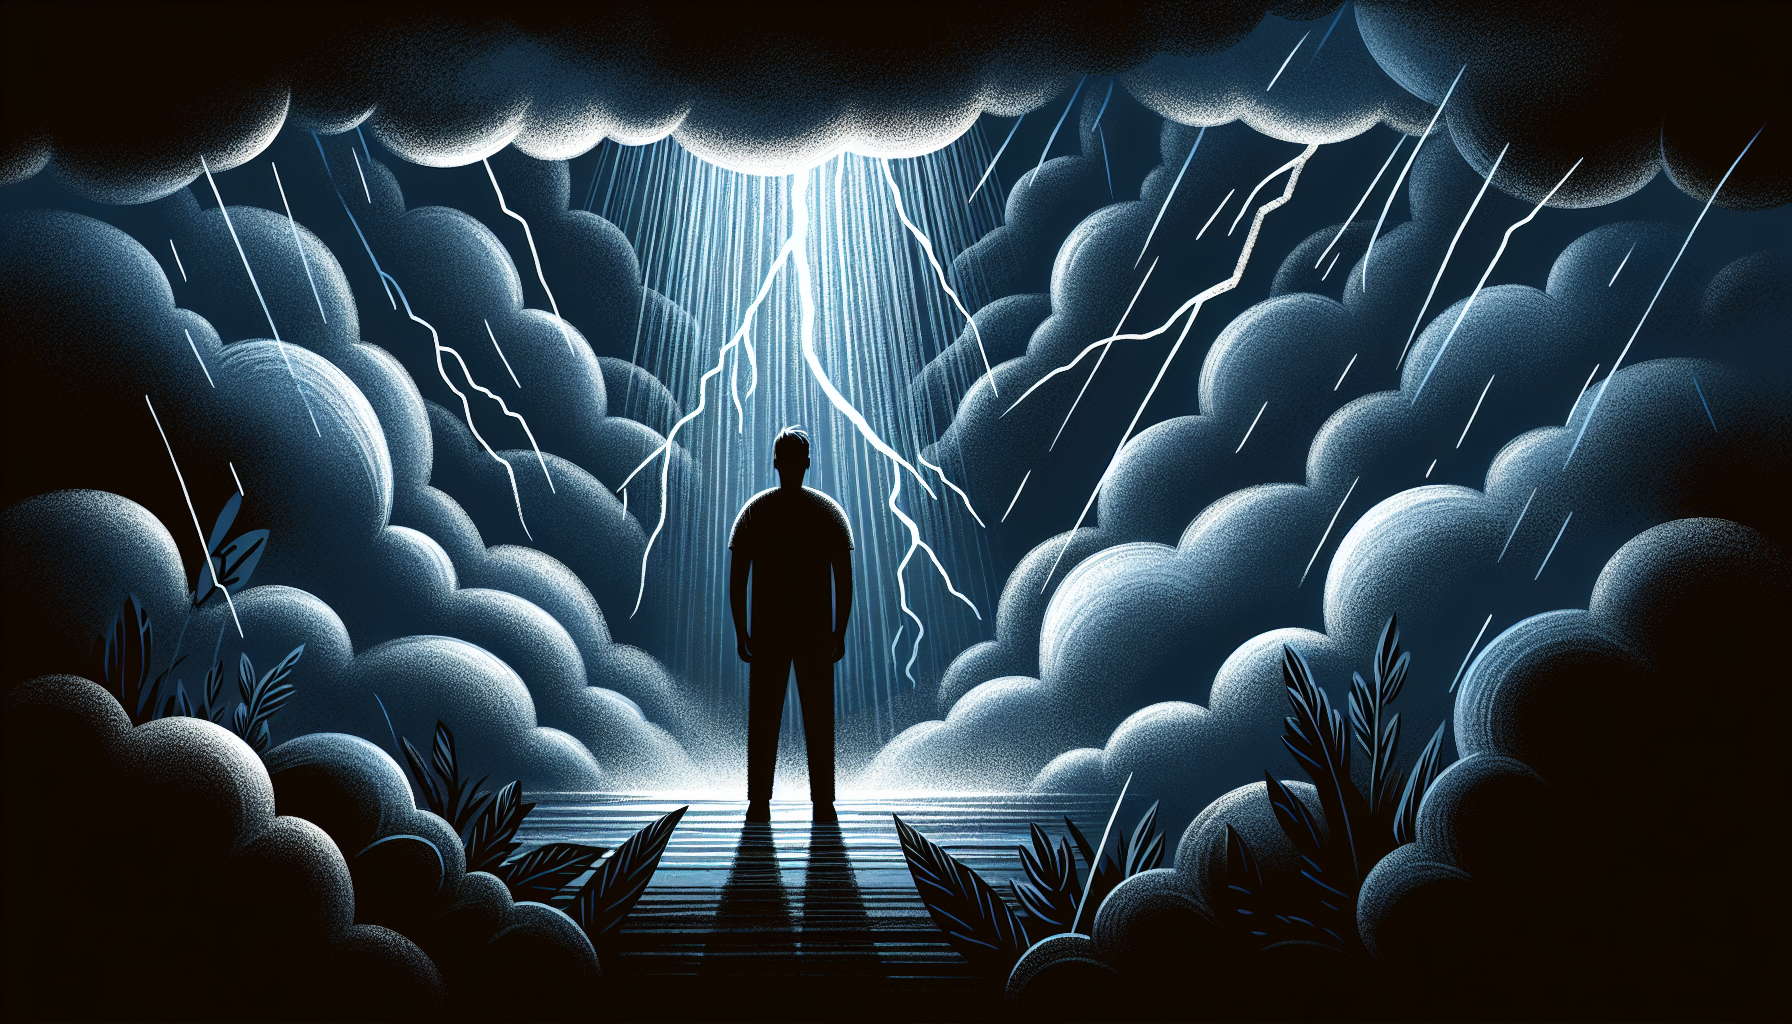 Illustration of a person surrounded by dark clouds, symbolizing trauma and emotional turmoil